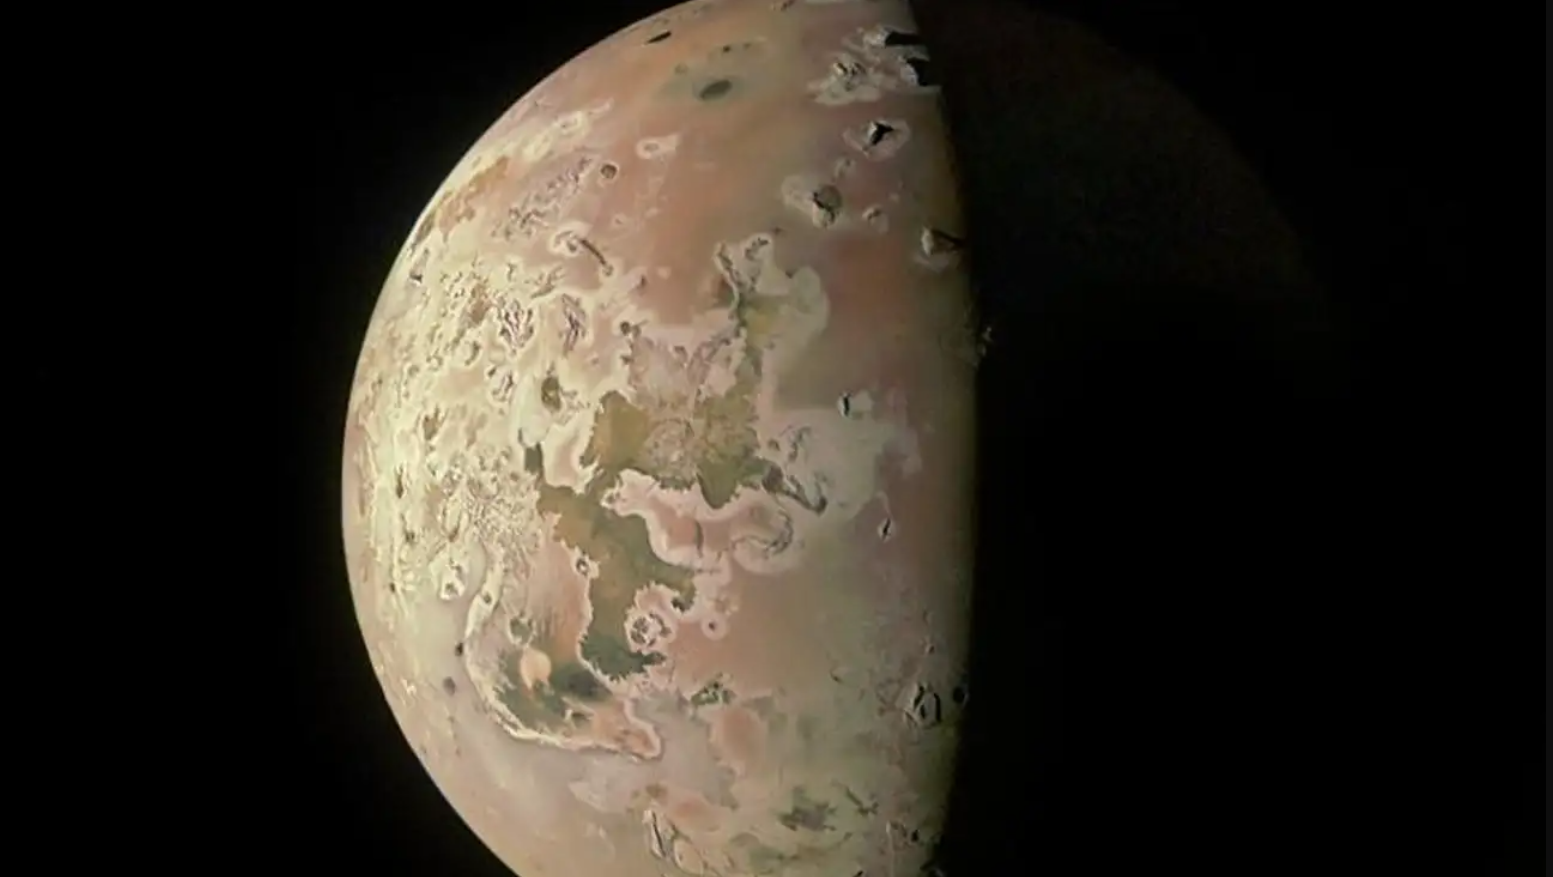 NASA’s Juno Mission Exposes the Infernal Scenery of Jupiter’s Moon Io in its Recent Flyby